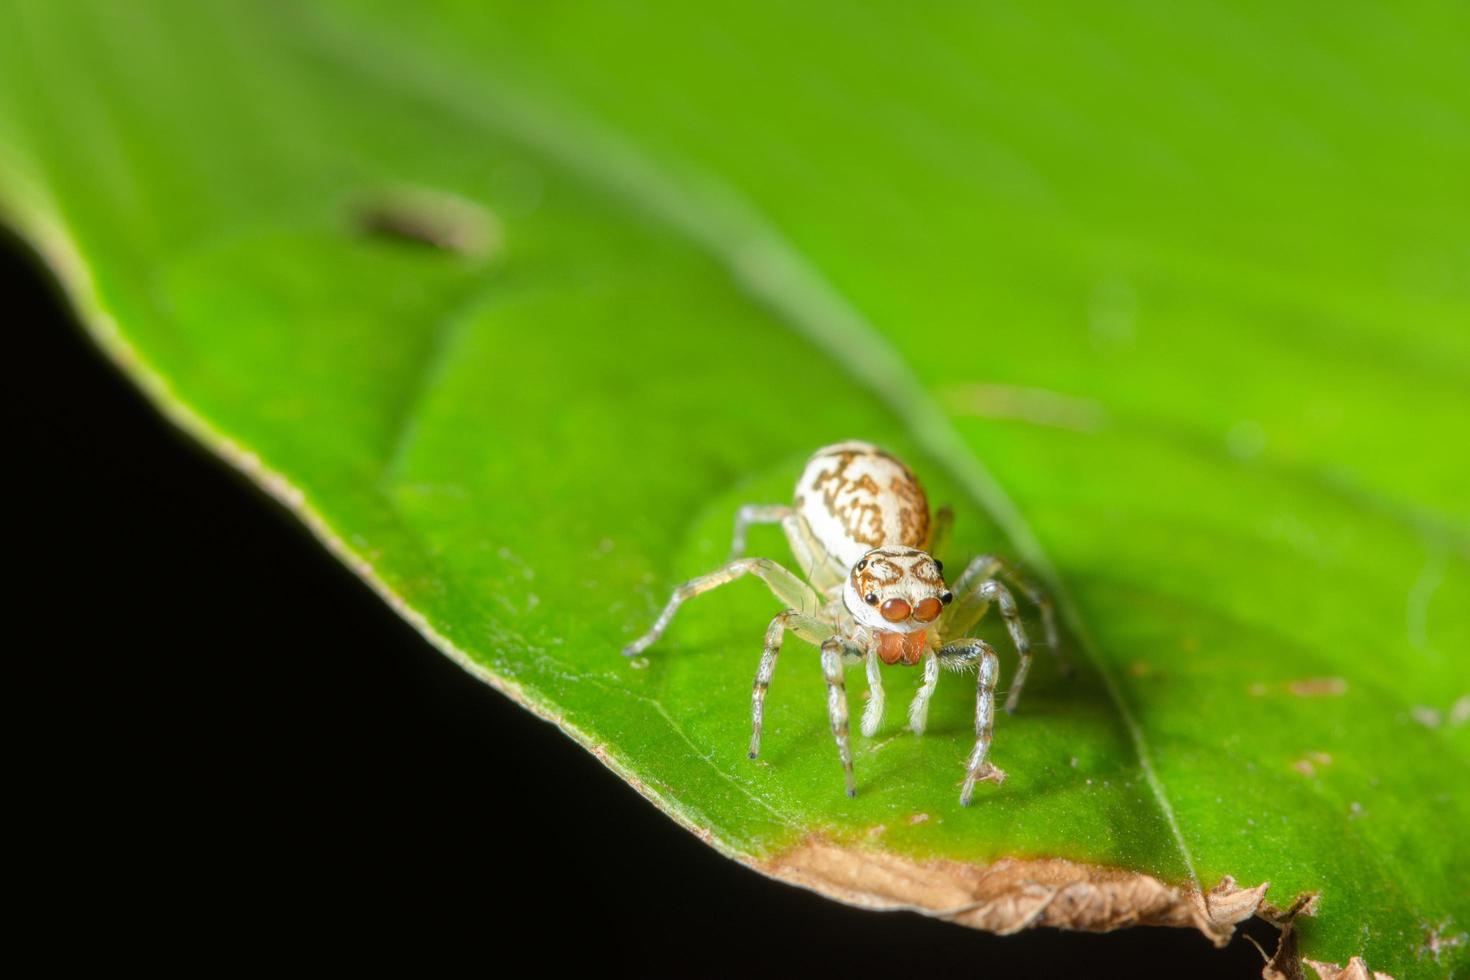 Spider on a leaf, close-up photo